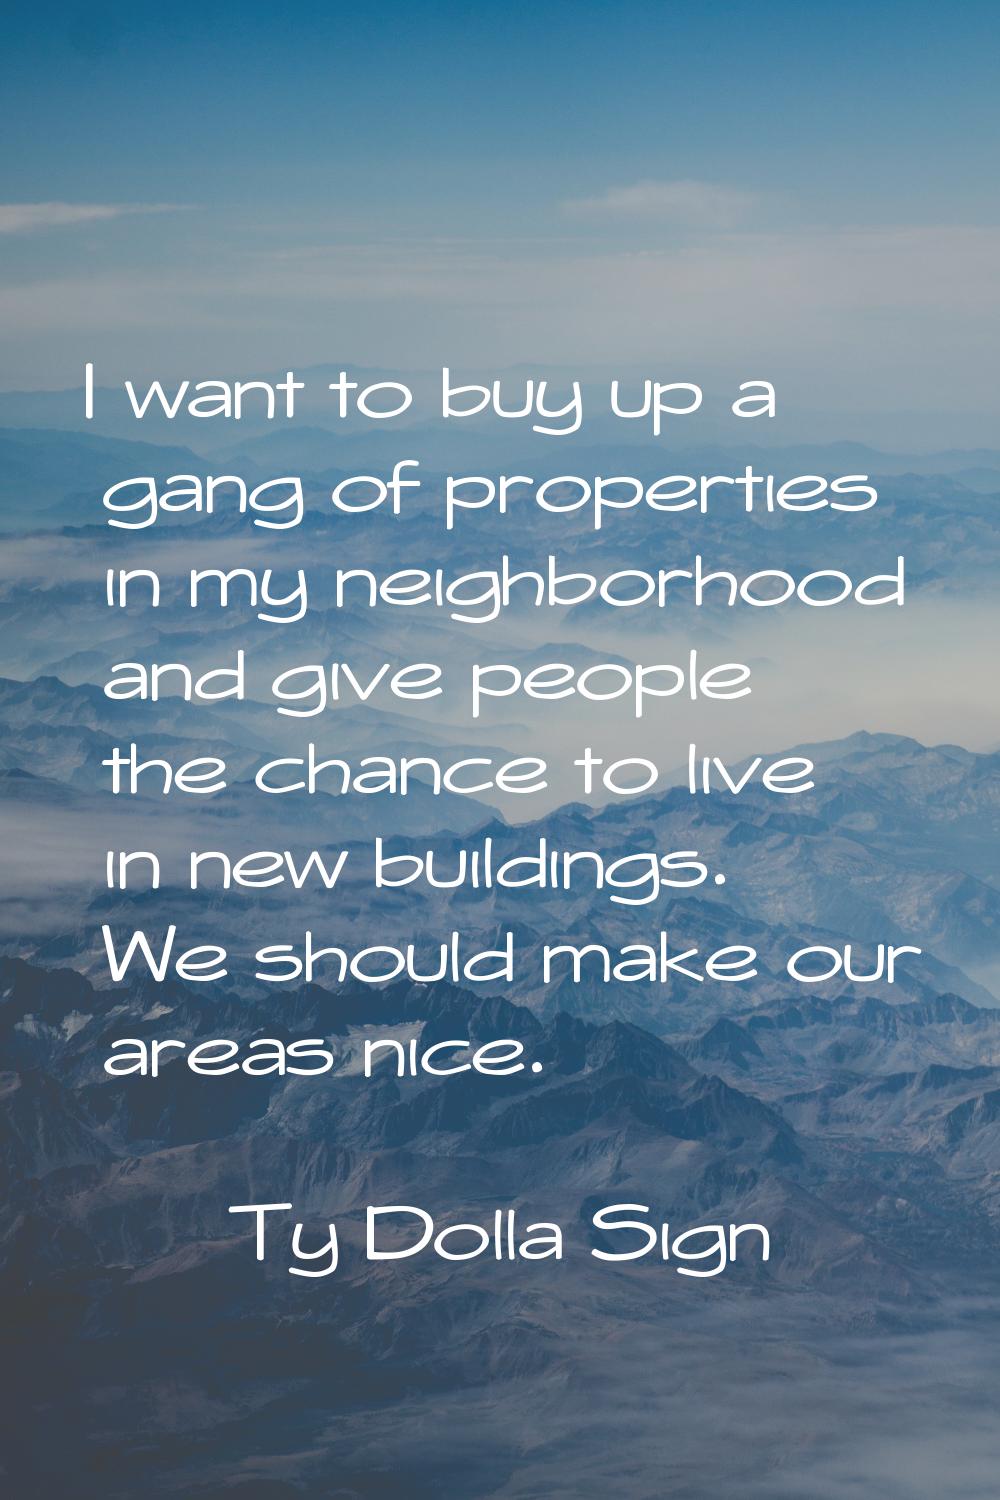 I want to buy up a gang of properties in my neighborhood and give people the chance to live in new 